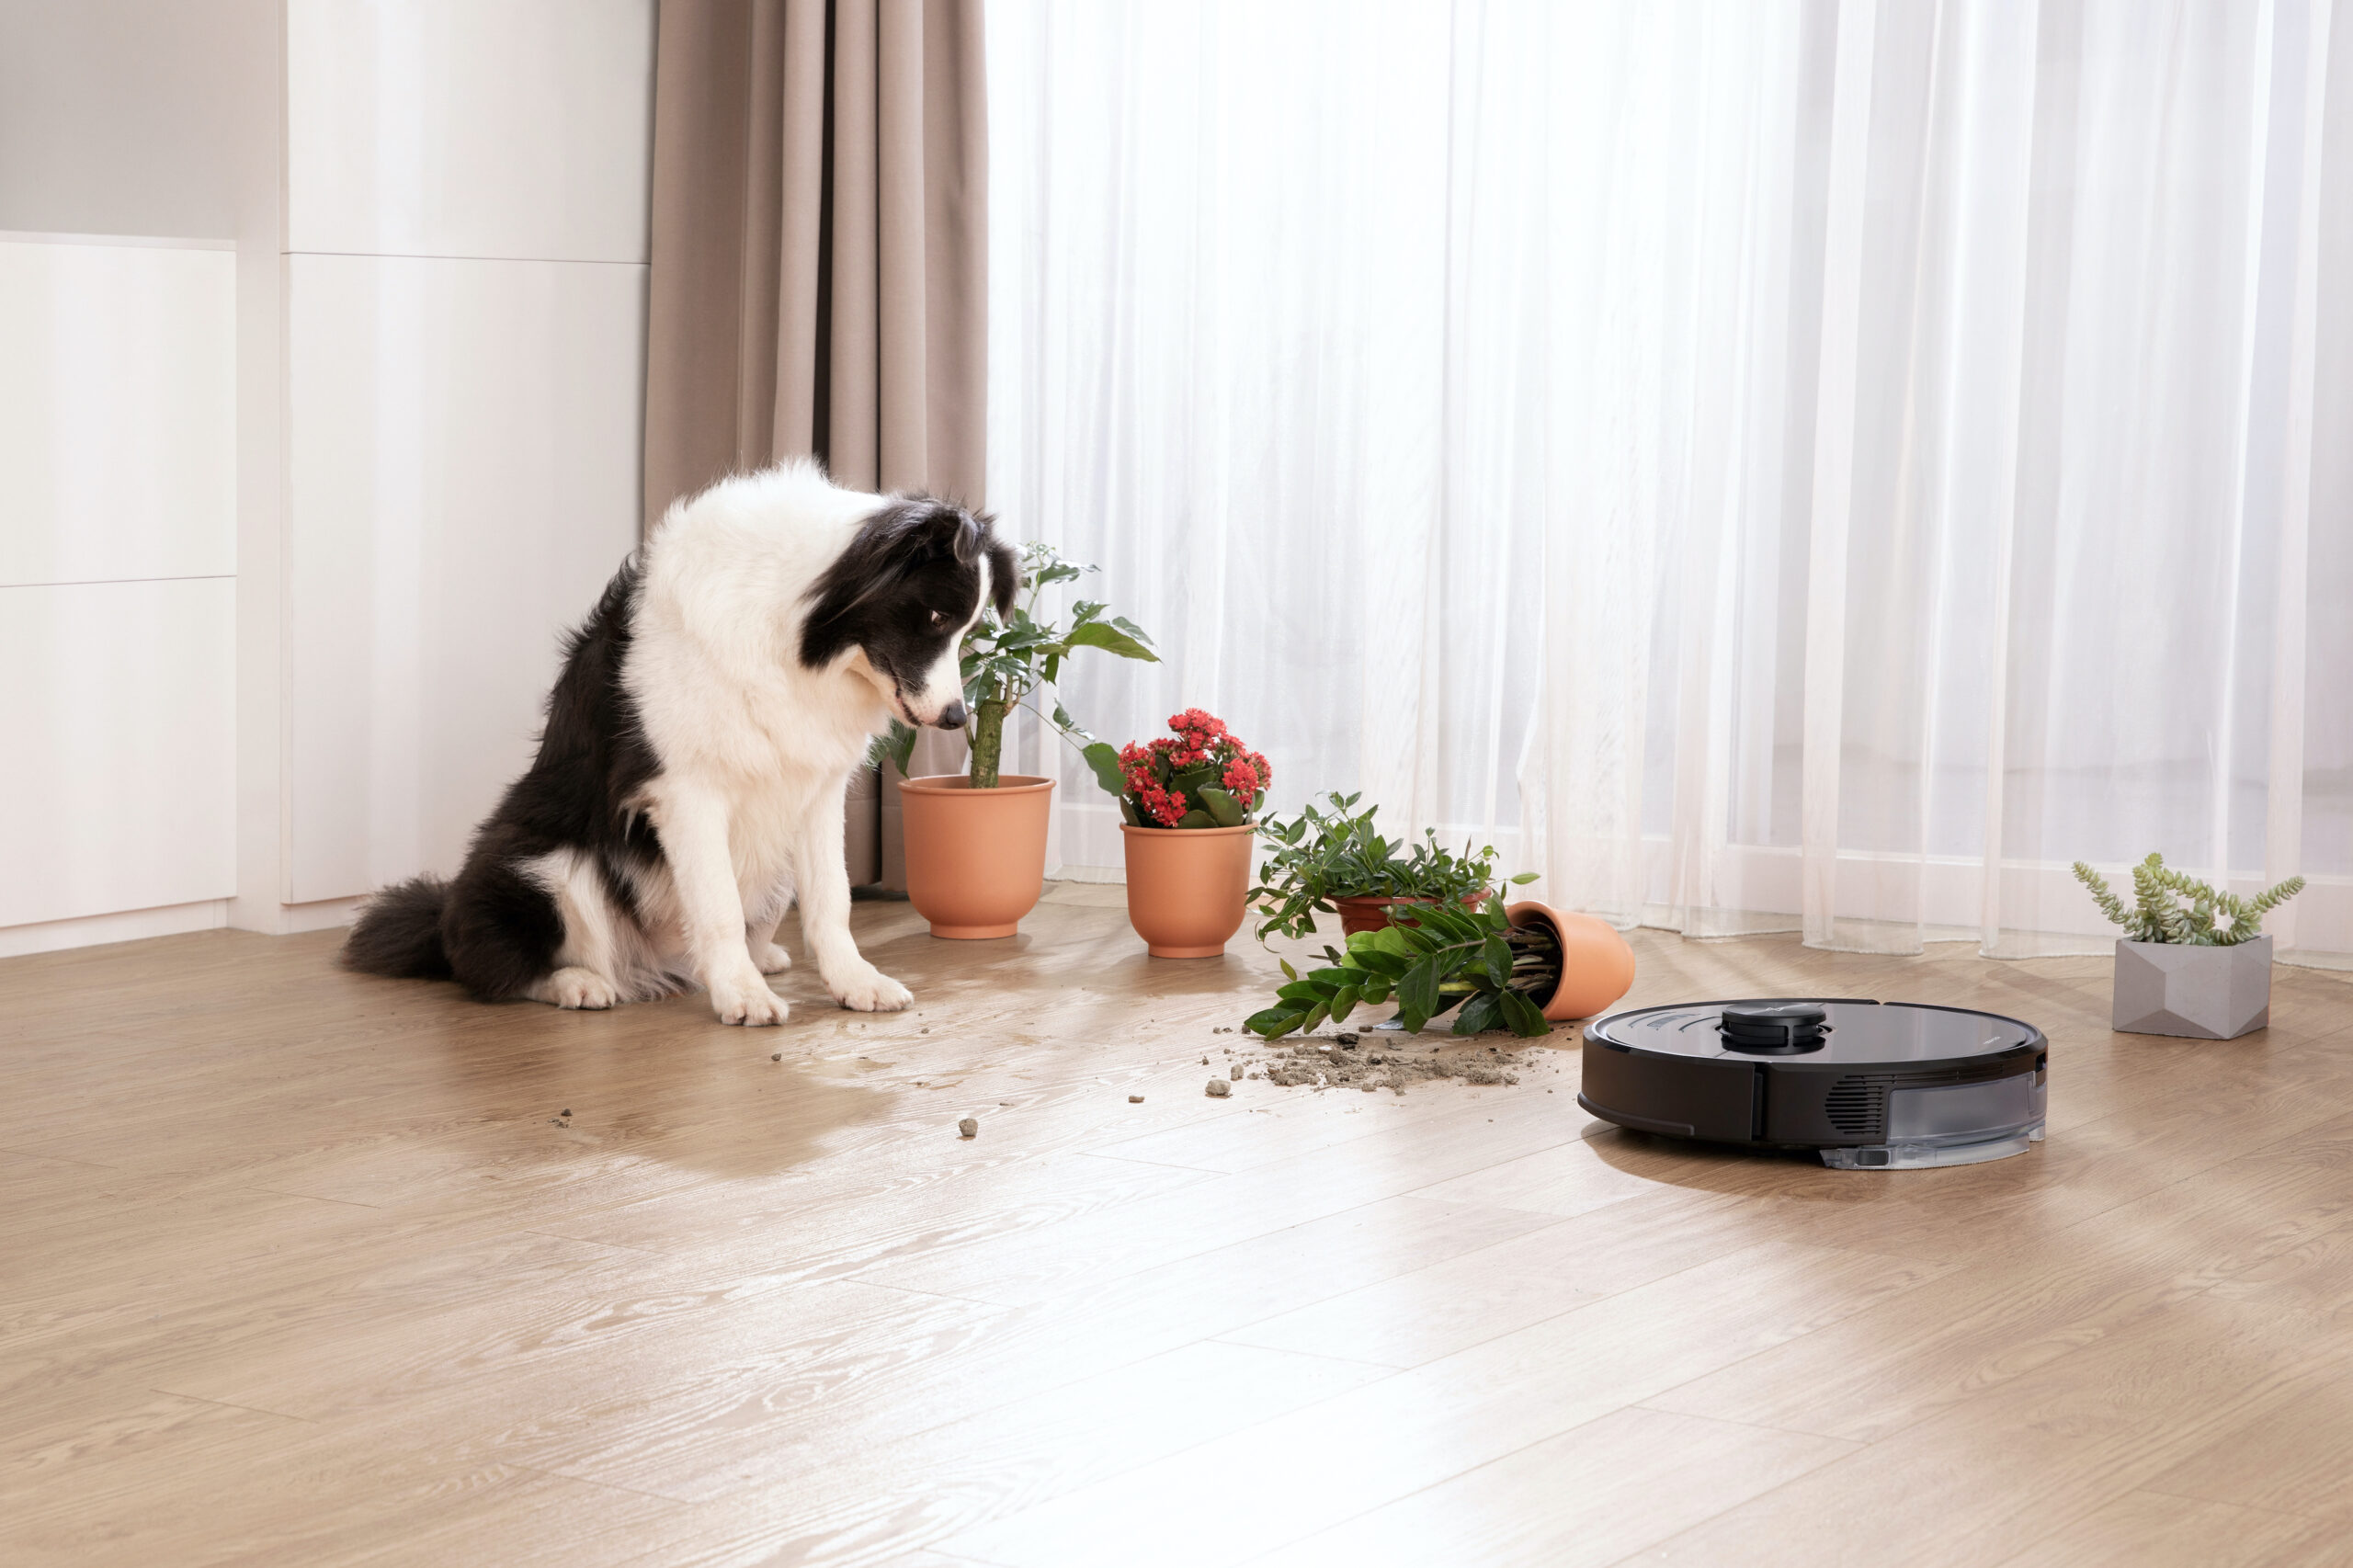 Looking to Buy The Best Robot Vacuum For Pets. Here Are The Top 10 Bobsweep Models You Should Consider